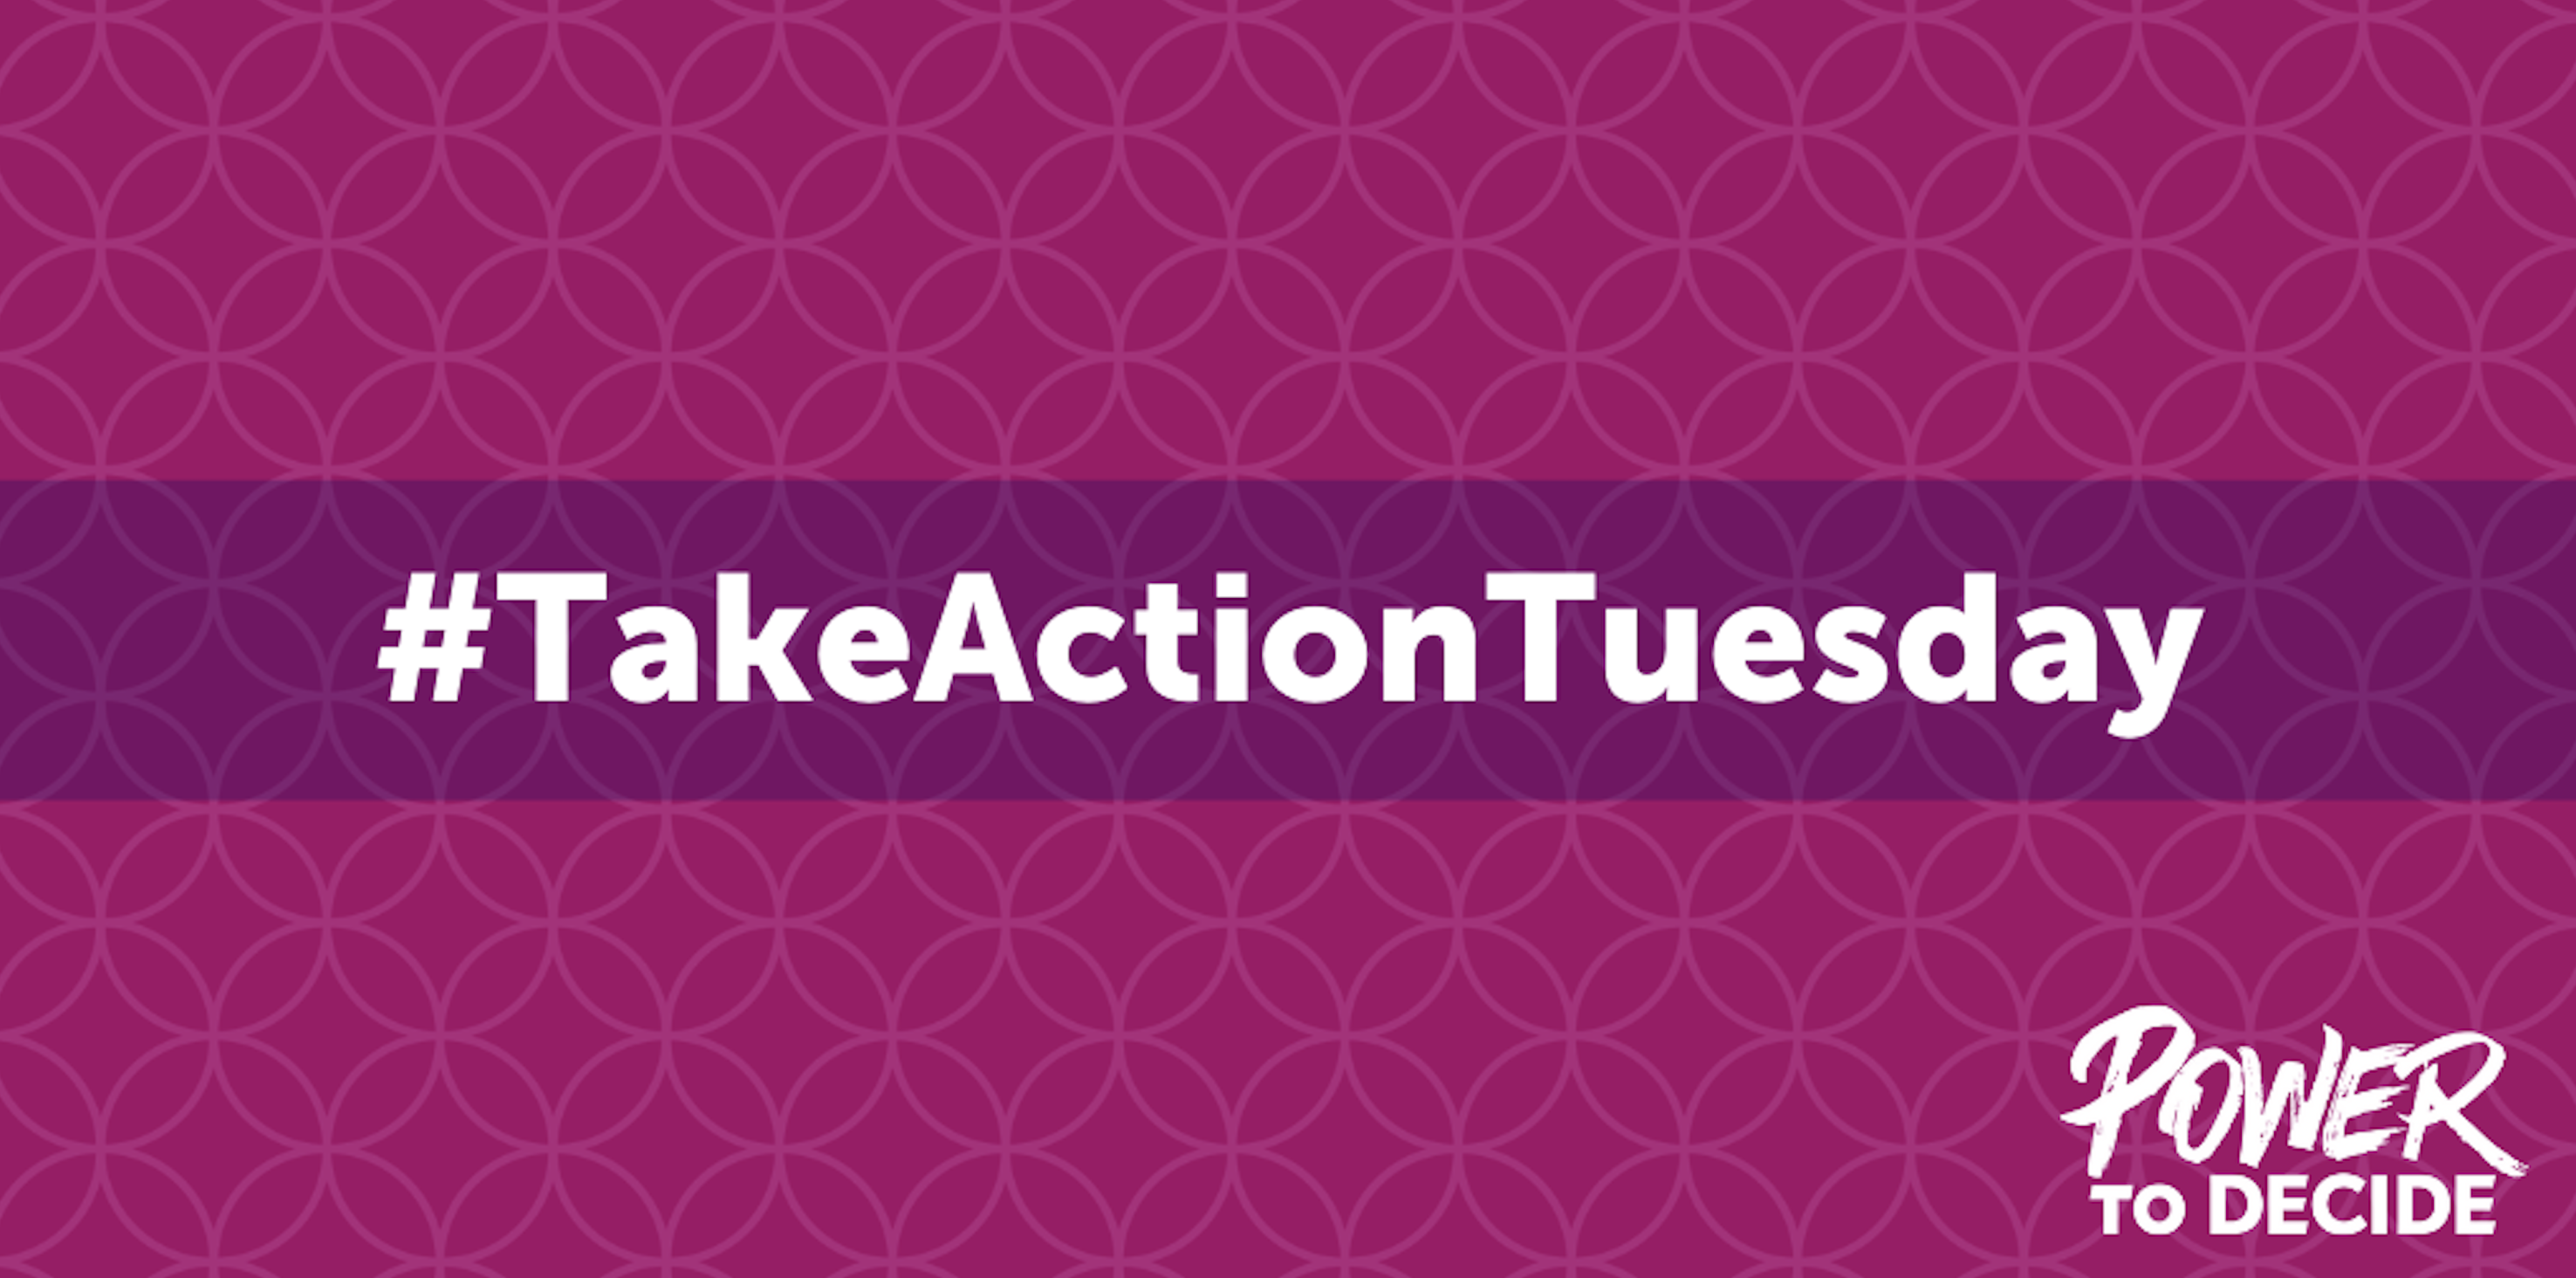 A purple card reading #TakeActionTuesday